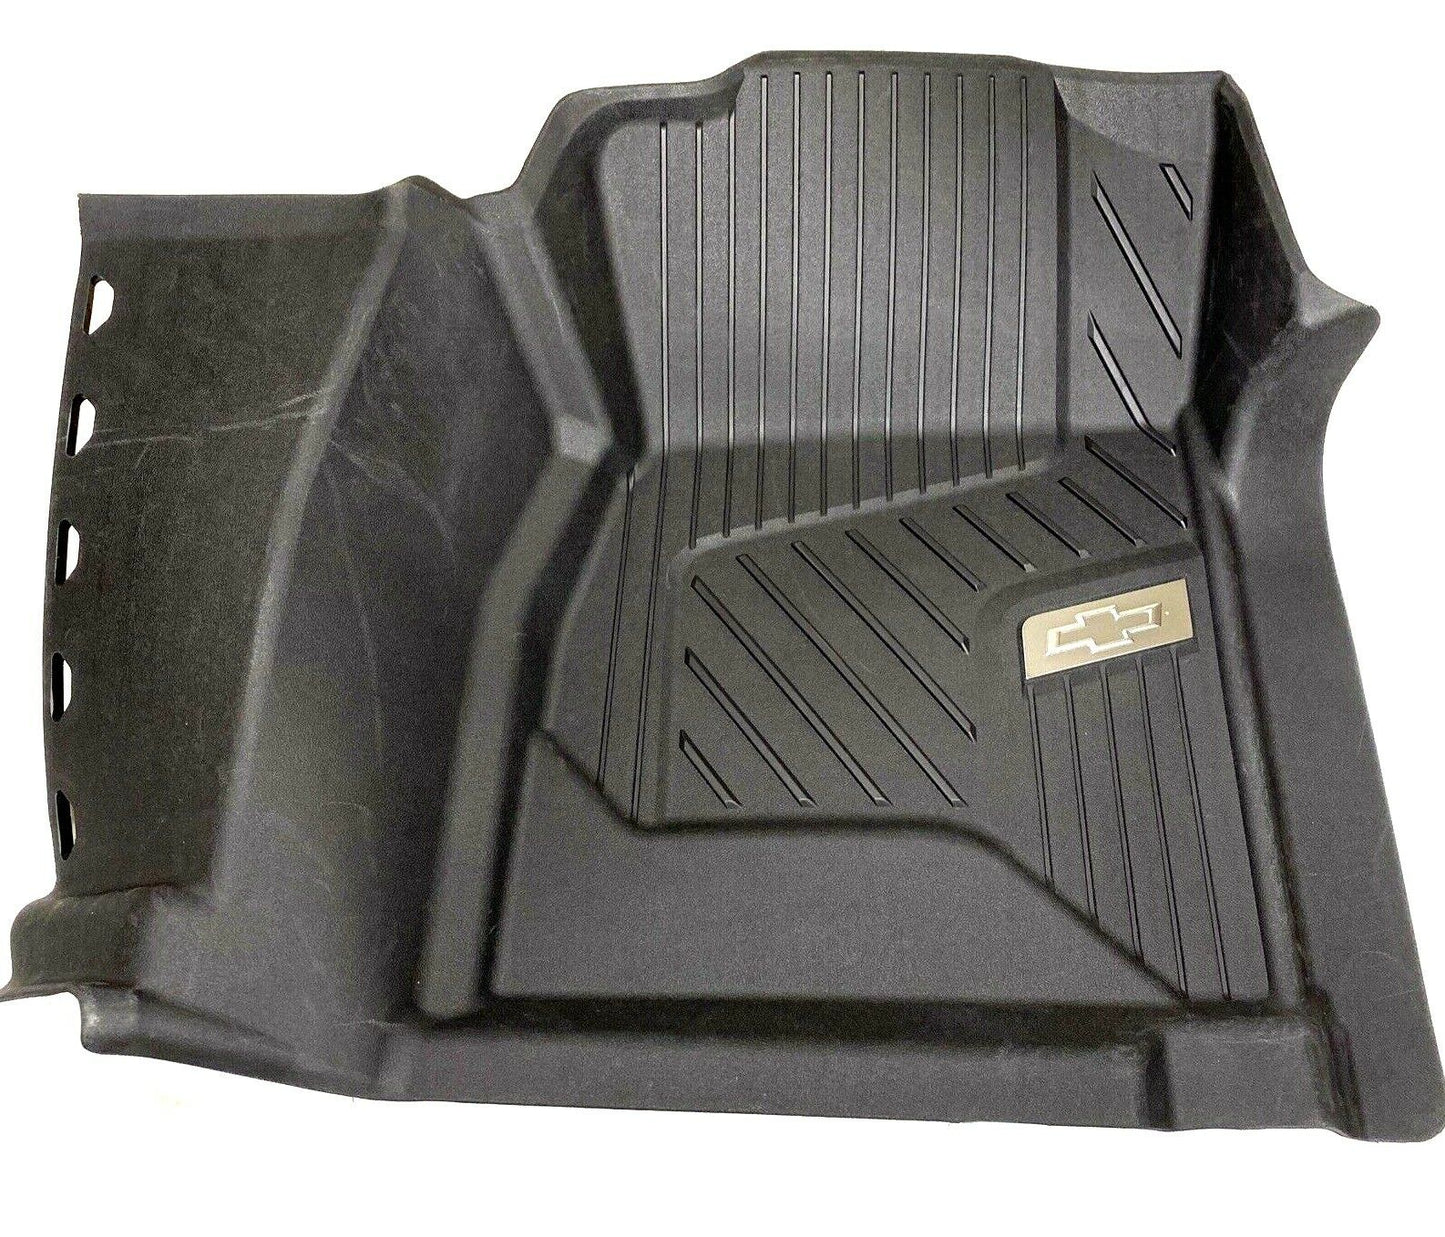 New OEM GM Chevy Silverado Front Floor Liner All-Weather 2016-18 84357879